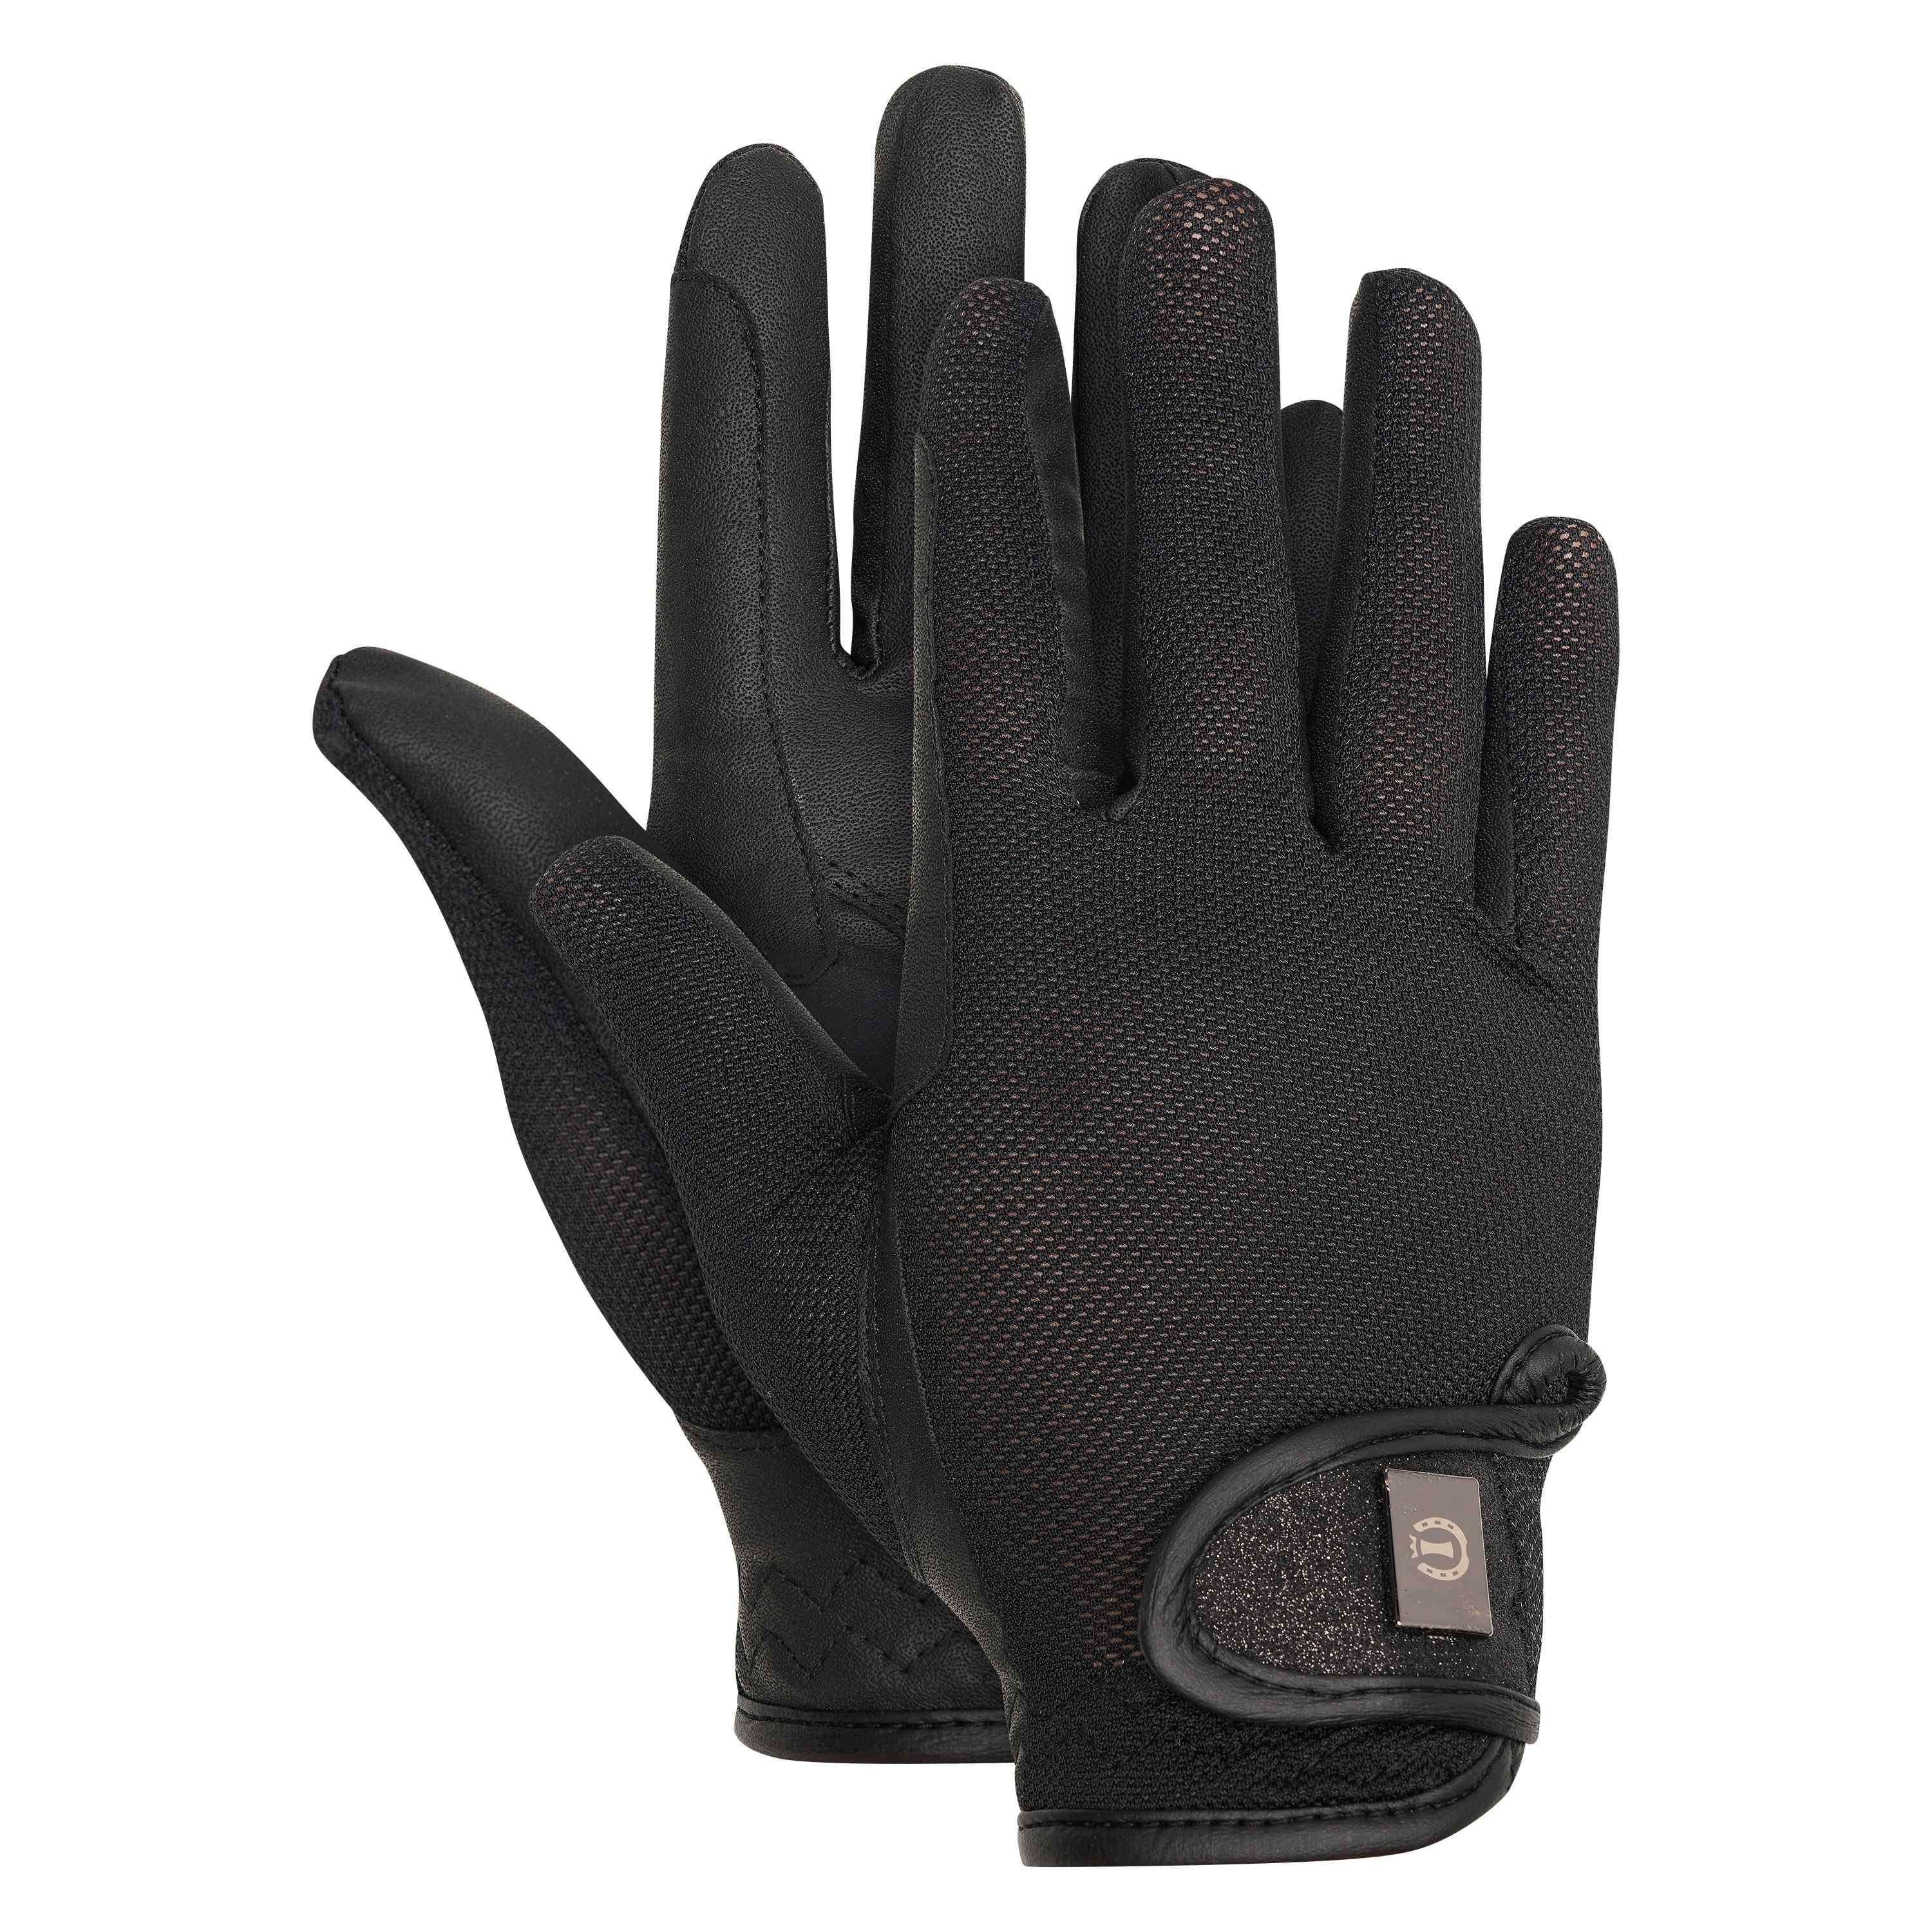 Imperial Riding | Handschuhe Summercool - Black | S